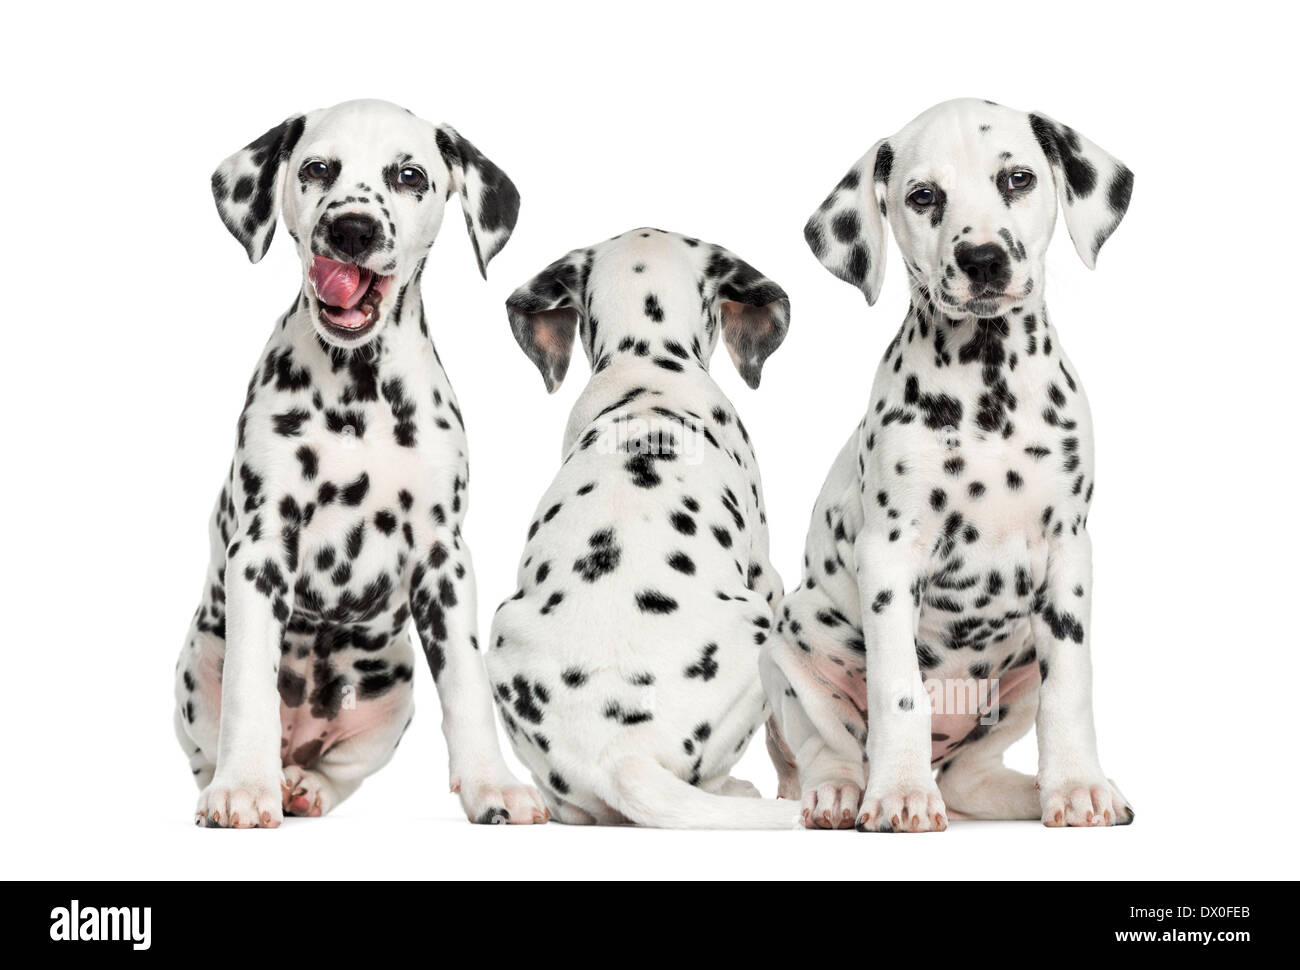 Dalmatian puppies sitting together against white background Stock Photo